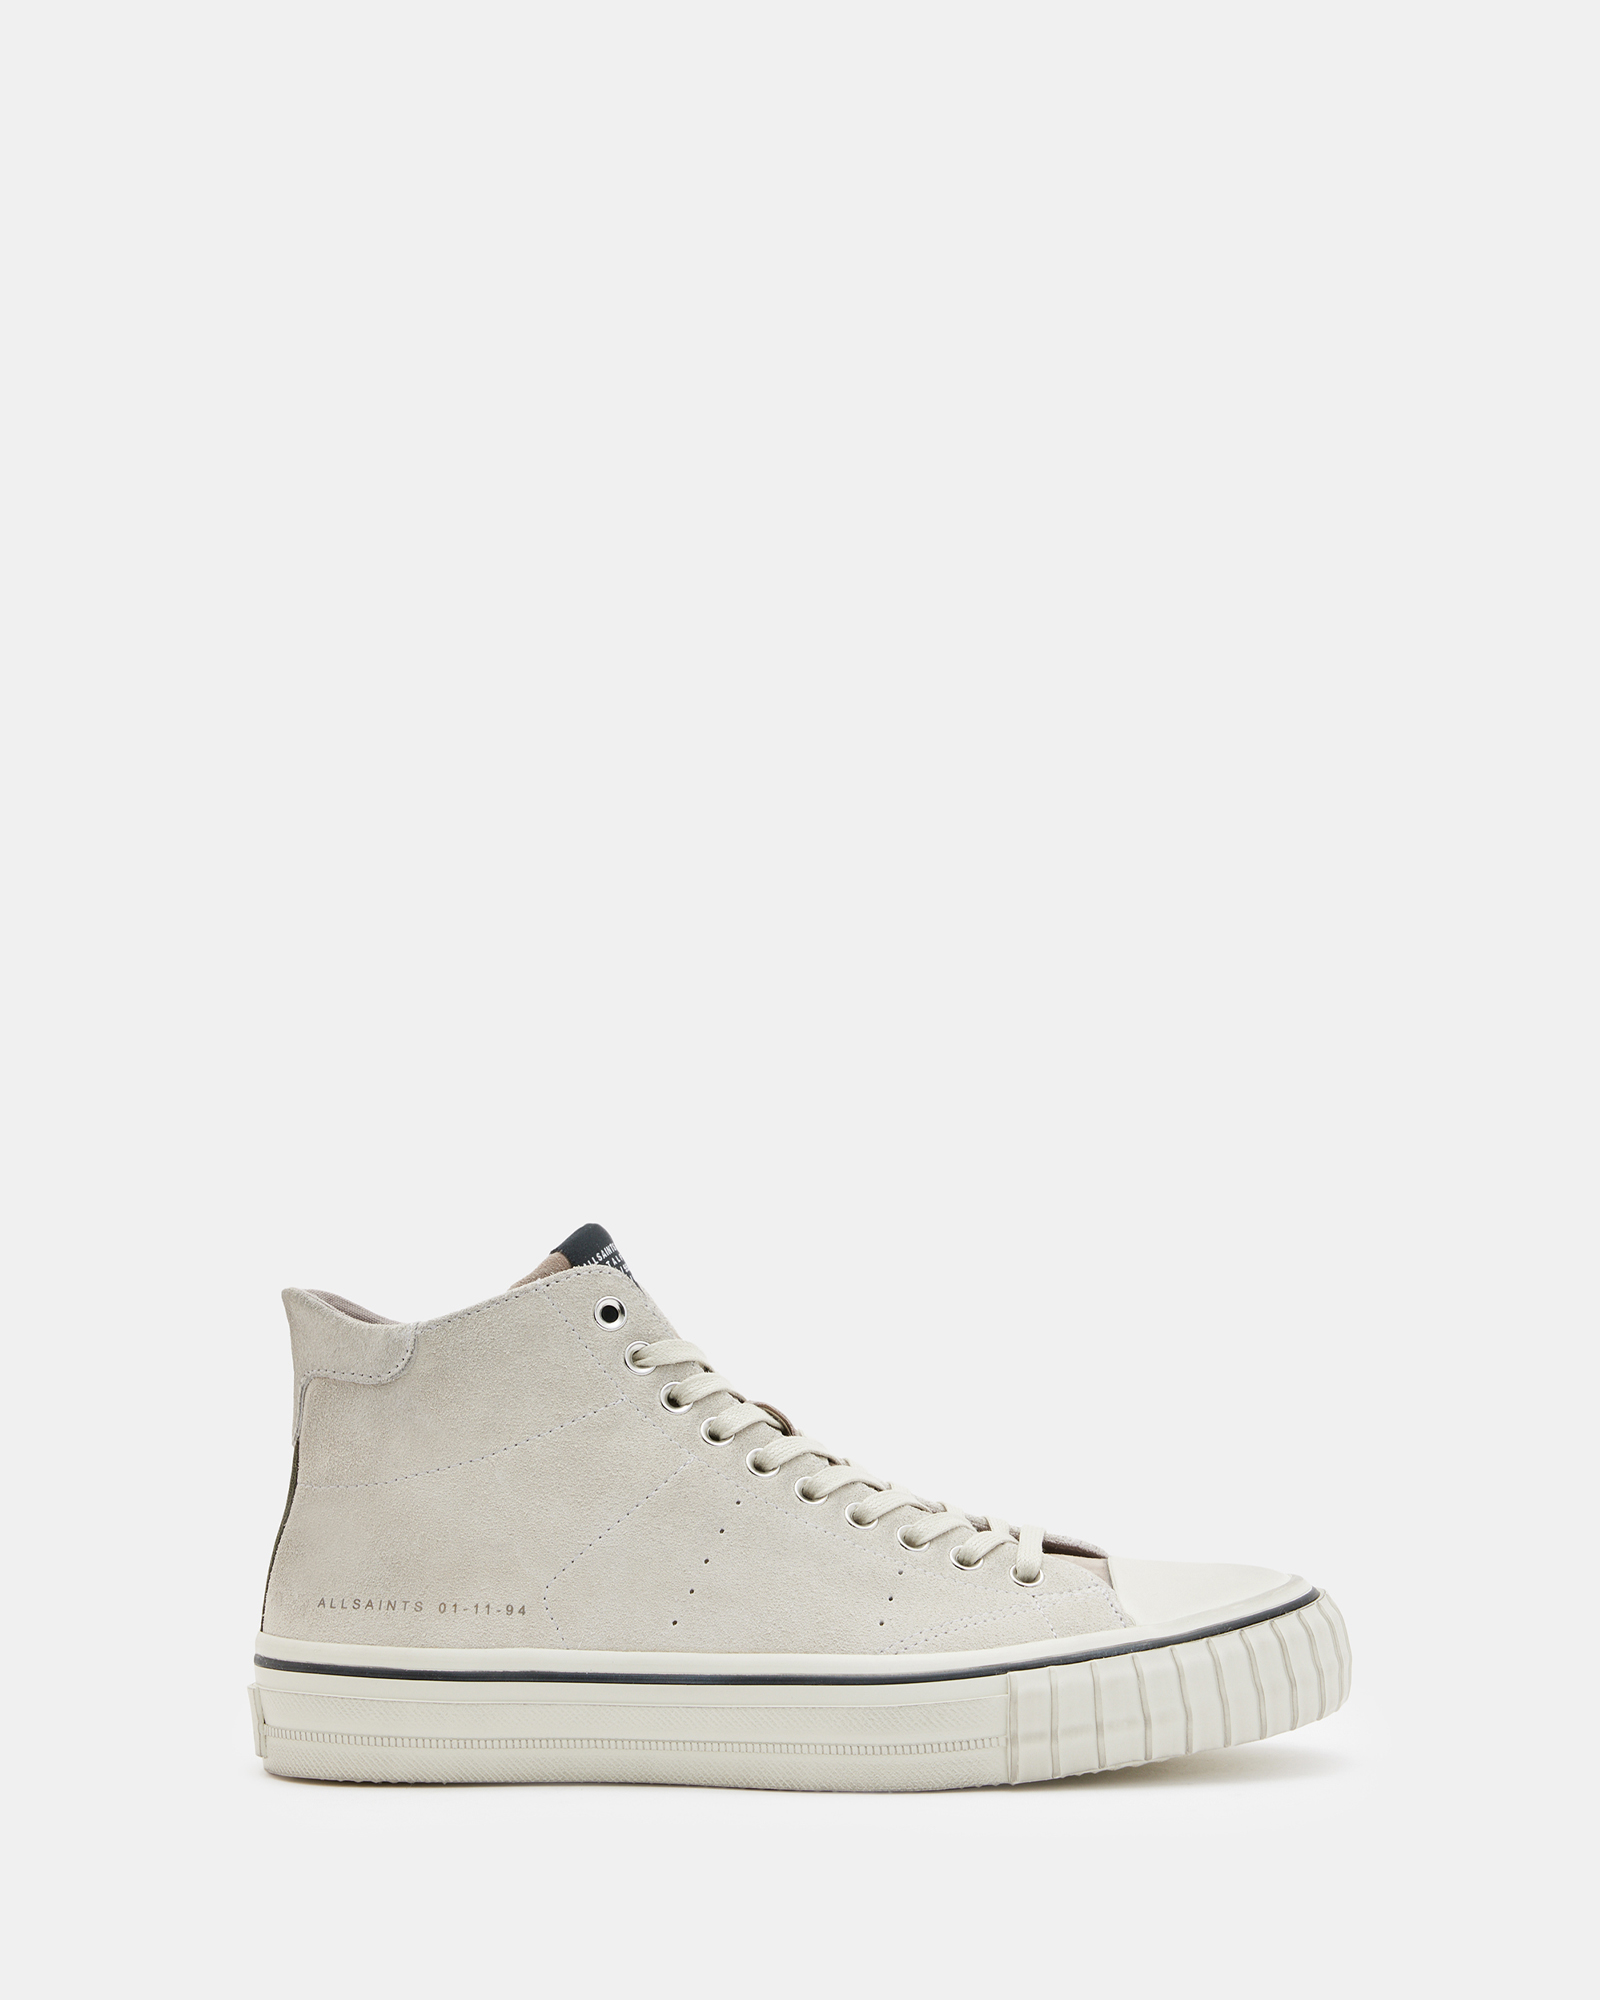 AllSaints Lewis Lace Up Suede High Top Trainers,, Chalk White